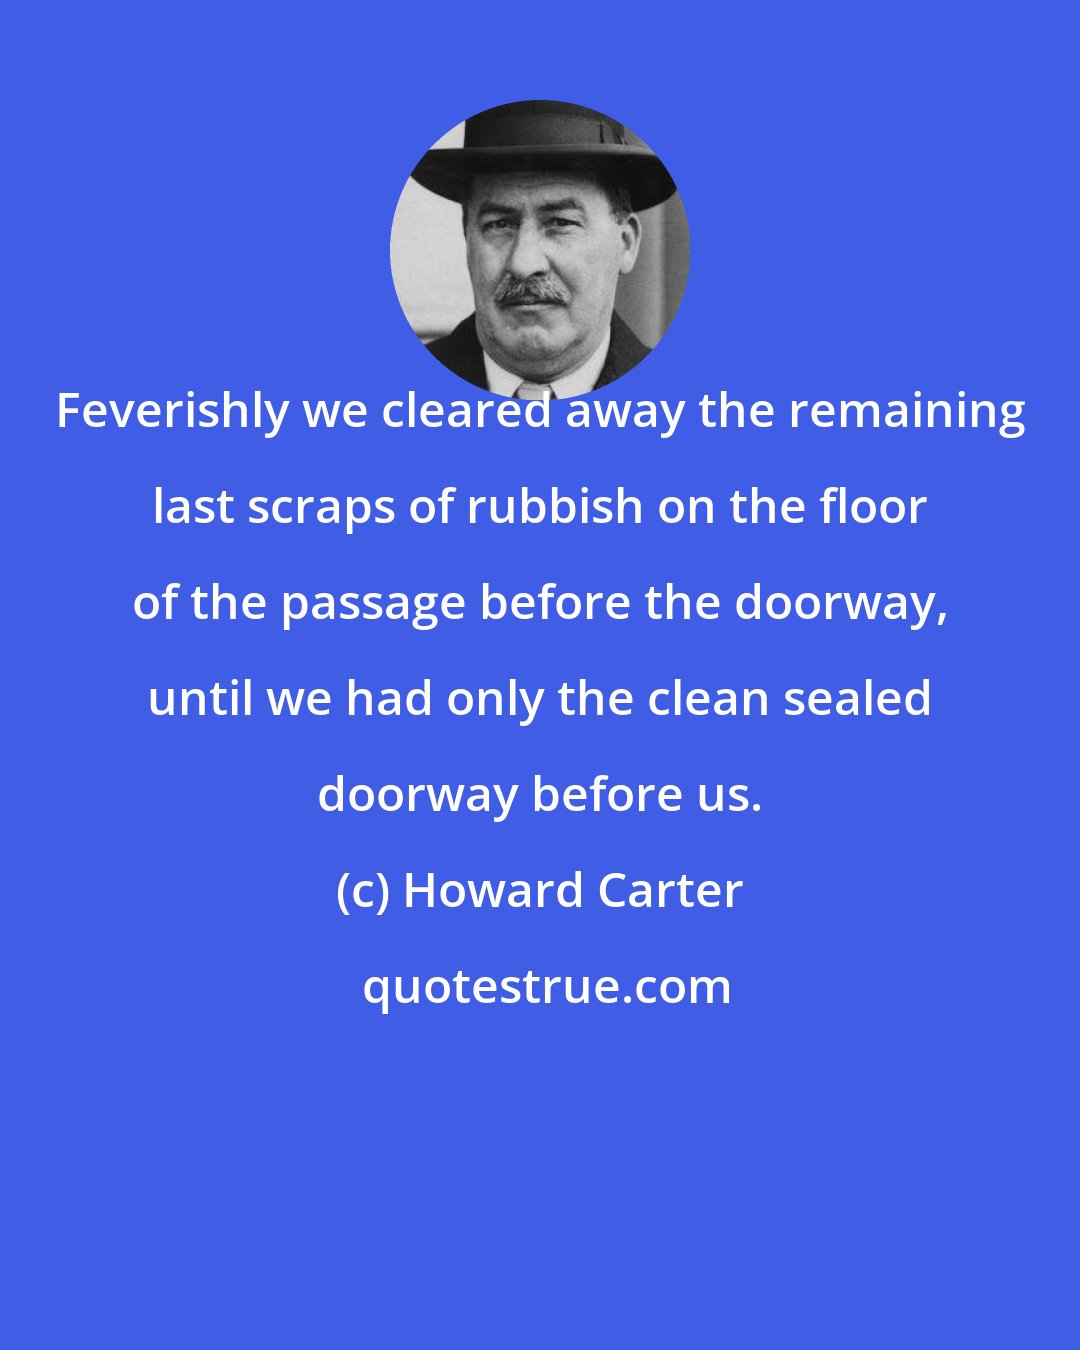 Howard Carter: Feverishly we cleared away the remaining last scraps of rubbish on the floor of the passage before the doorway, until we had only the clean sealed doorway before us.